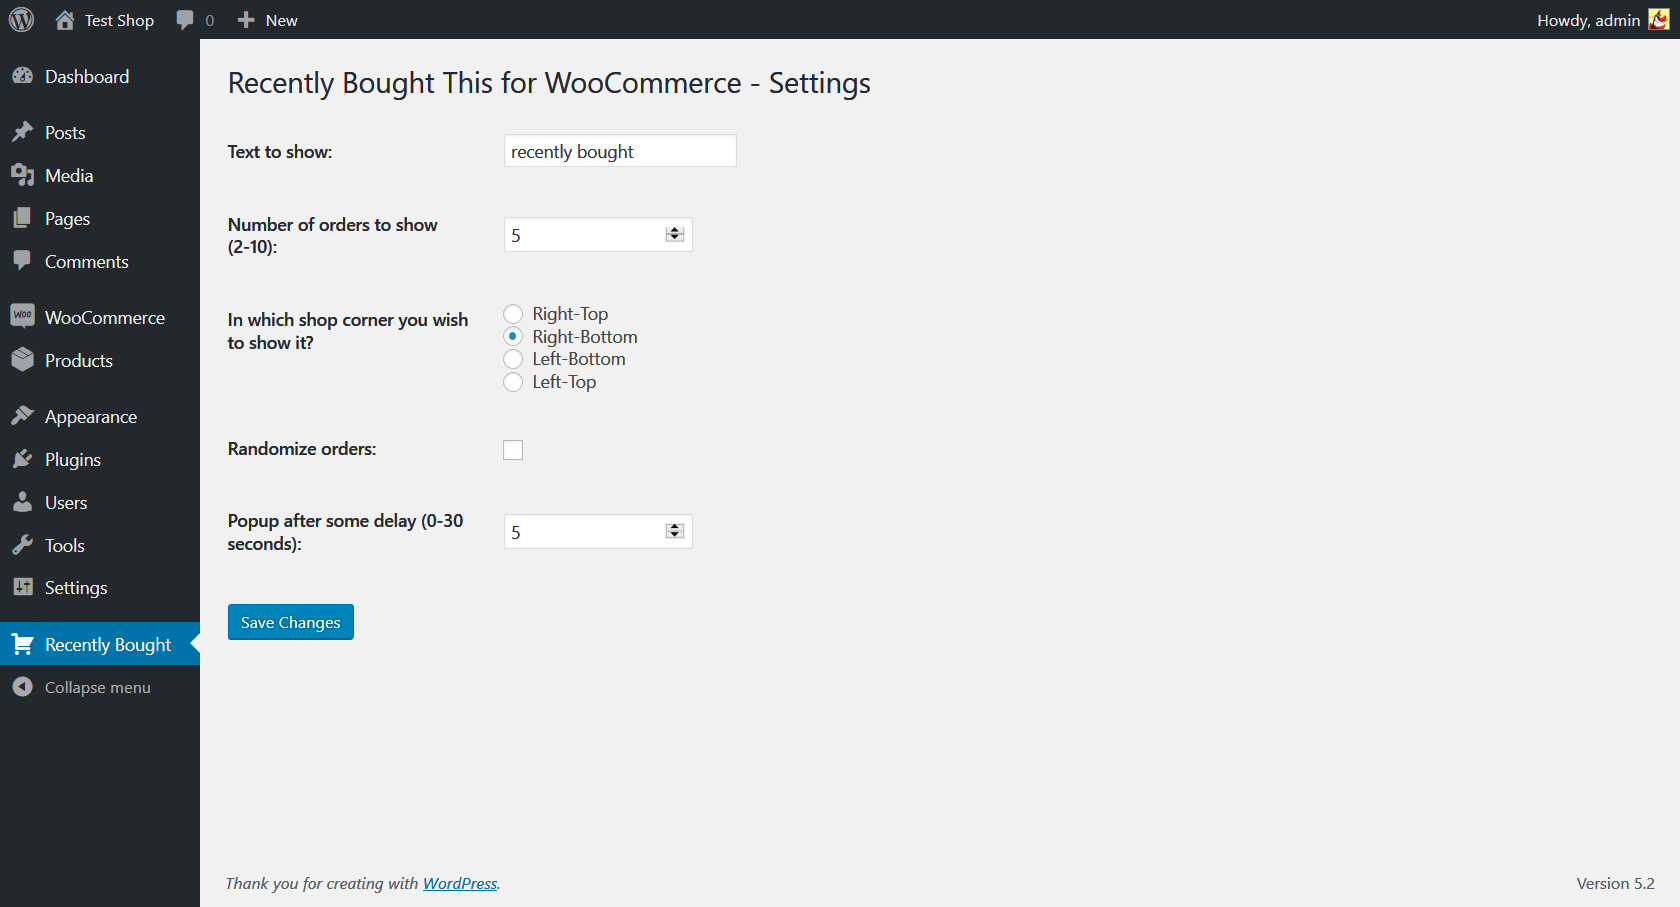 Screenshot 2 - Recently Bought This for WooCommerce - settings page.